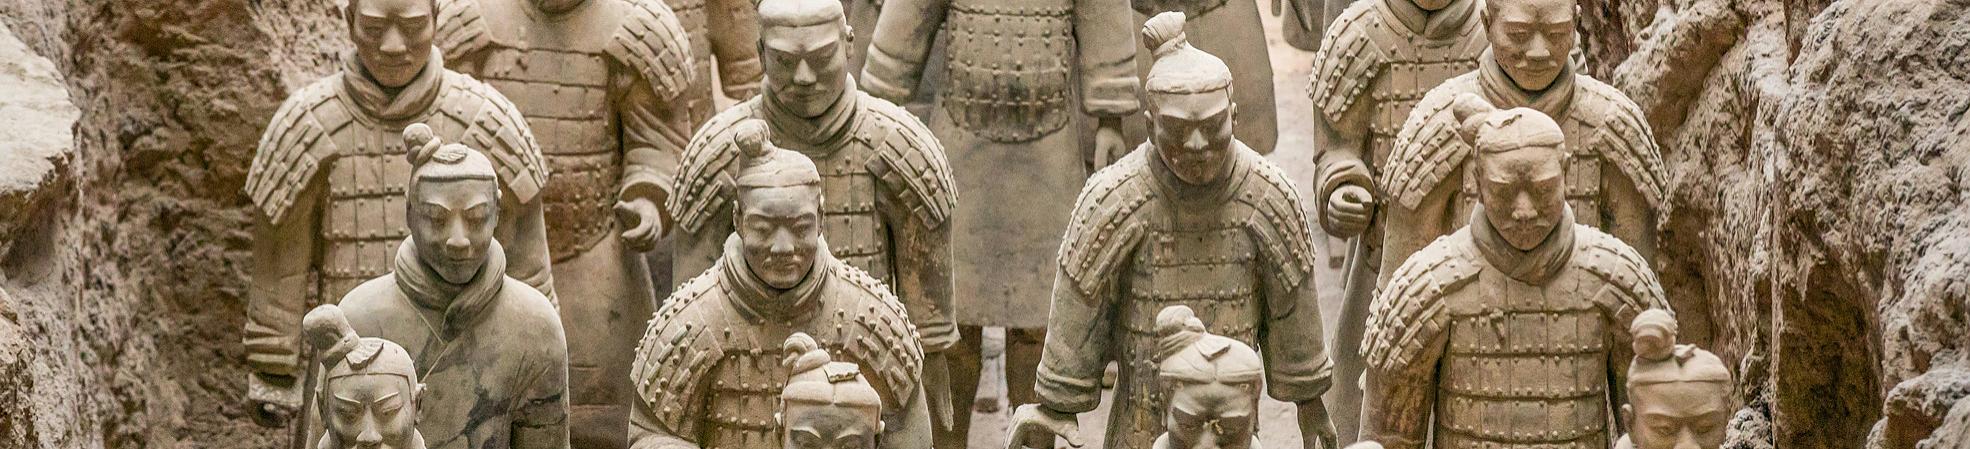 Xi'an Facts: Location, History, Culture, Religion